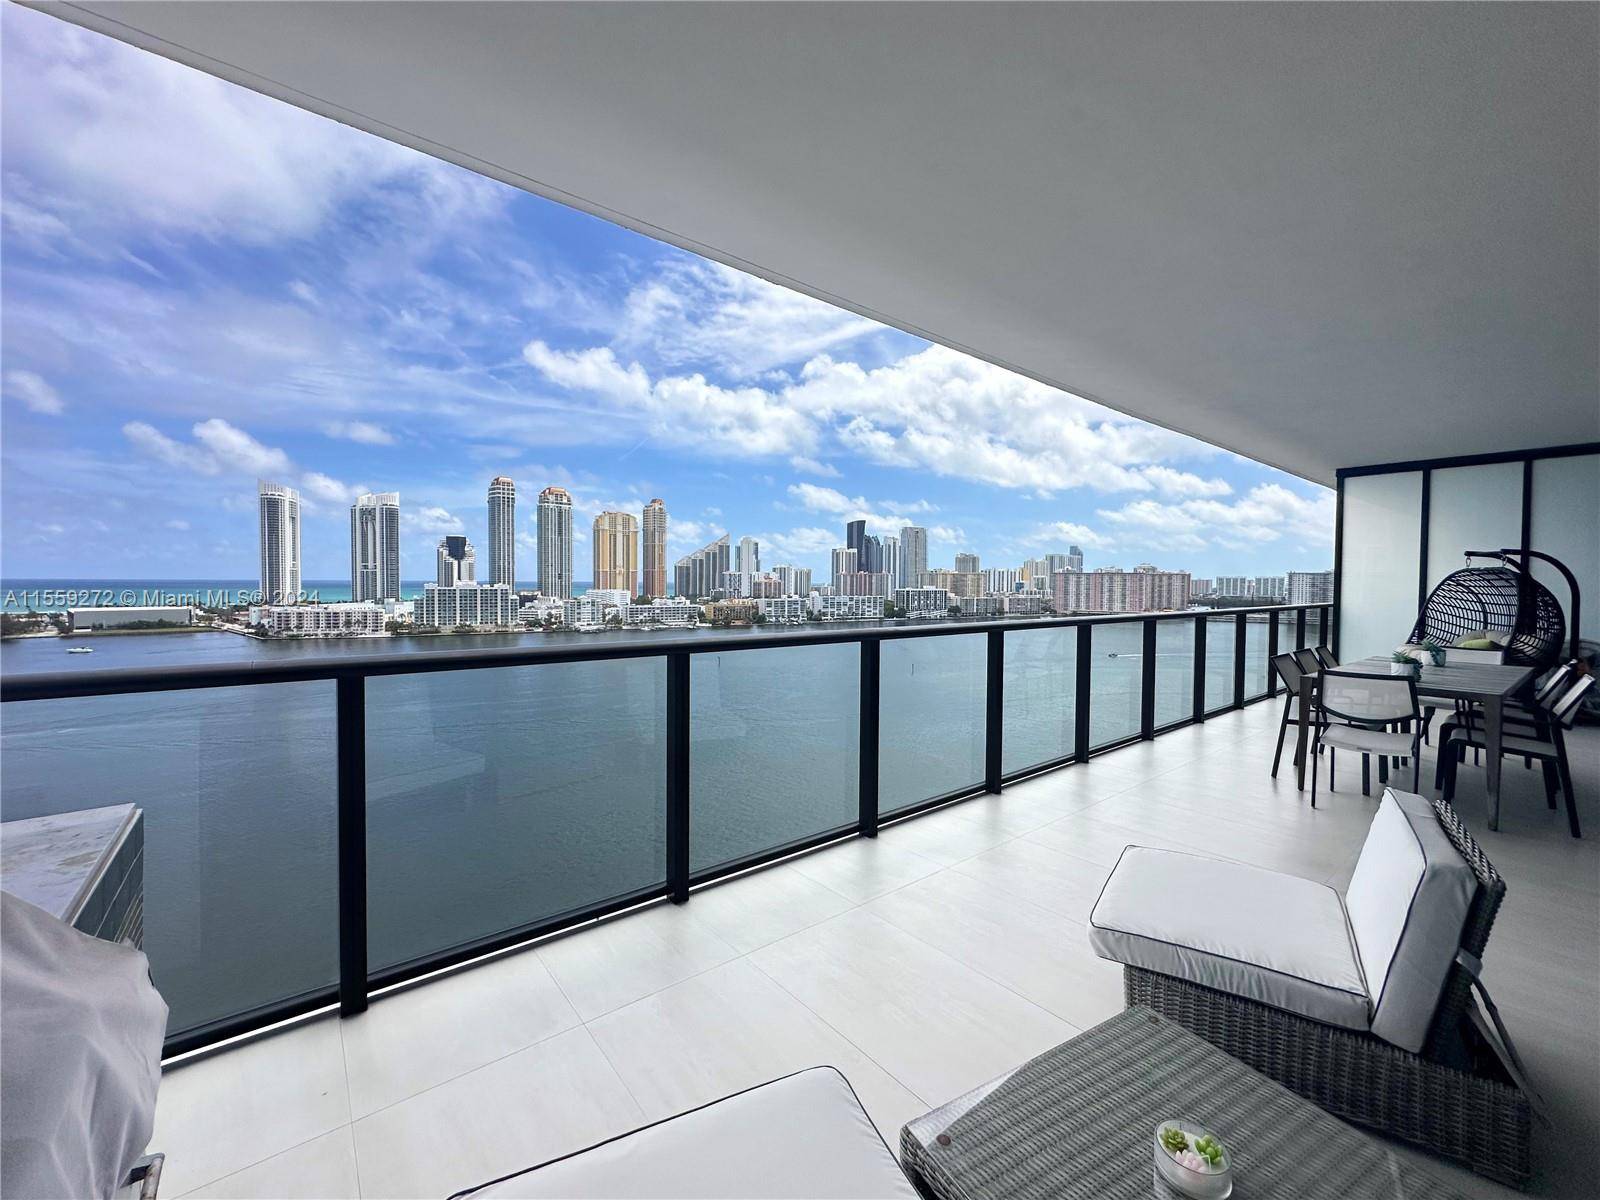 Amazing 3 Bedroom 4. 5 unit at the Prive Island, enjoy the luxury and privacy of condo living with amazing views to Sunny Isles Skyline.